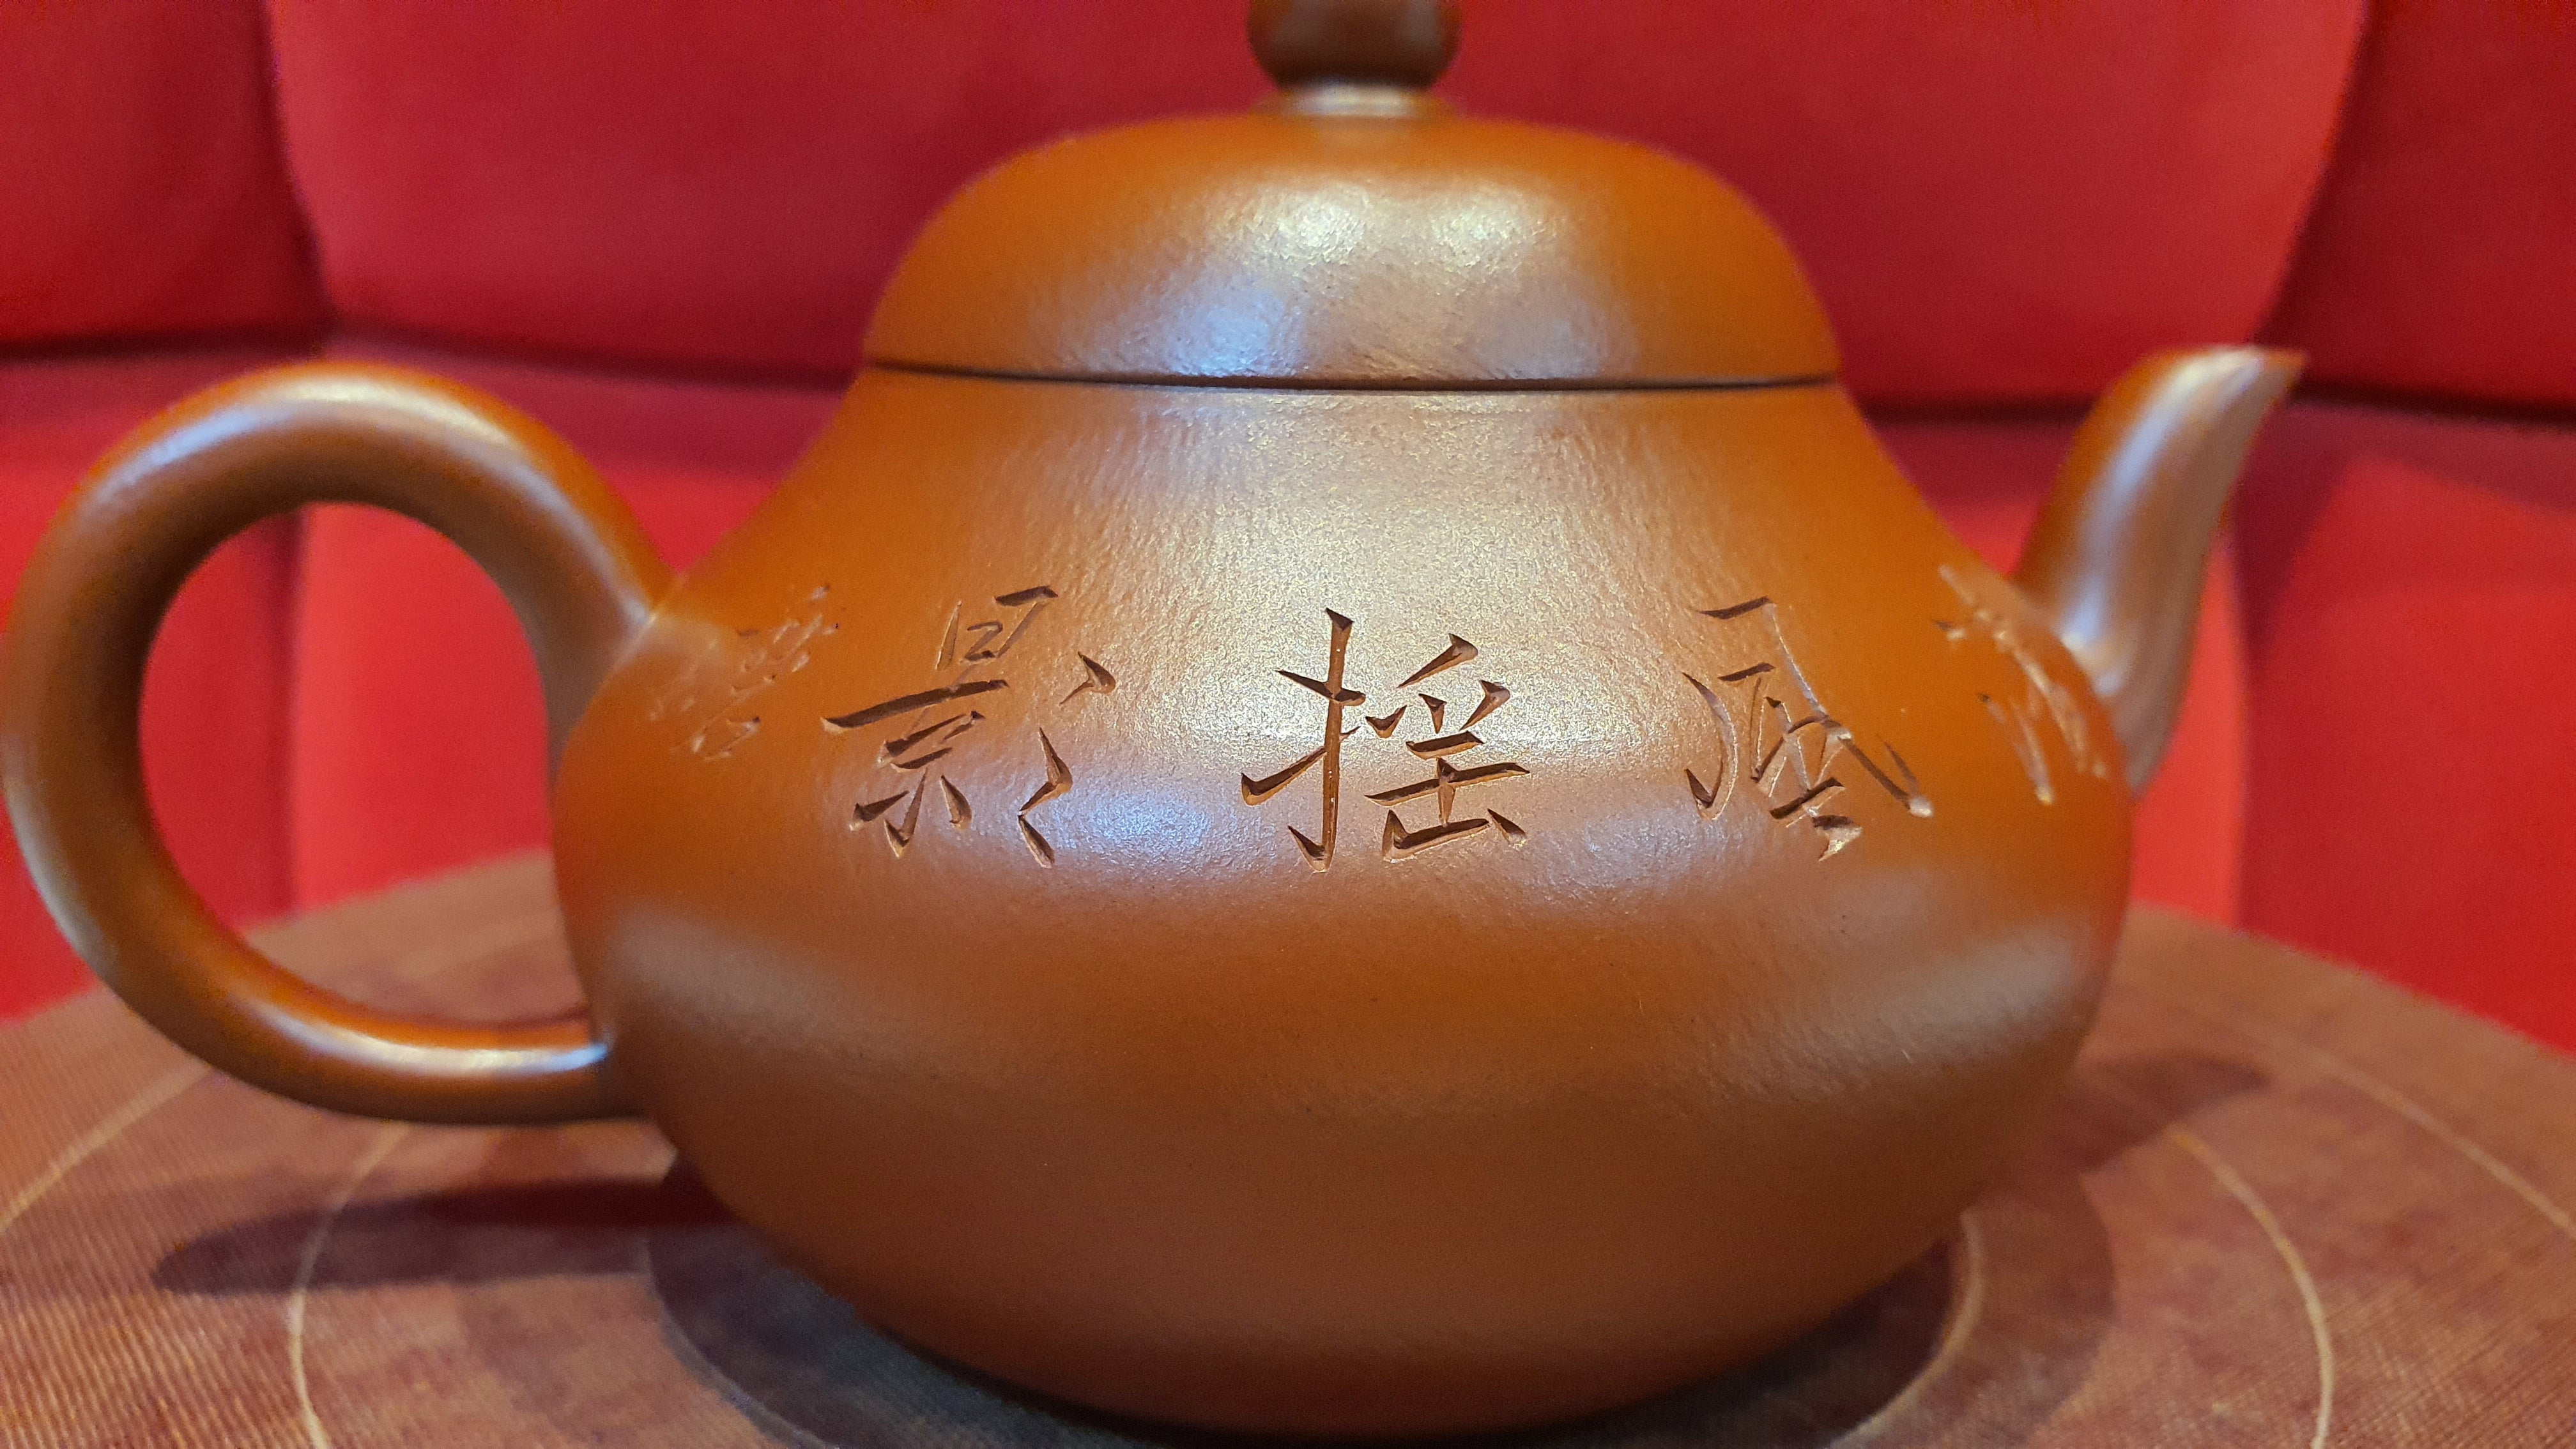 Li Xing 梨形with Bamboo Engraving 带刻绘(竹), 小煤窑朱泥XiaoMeiYao 